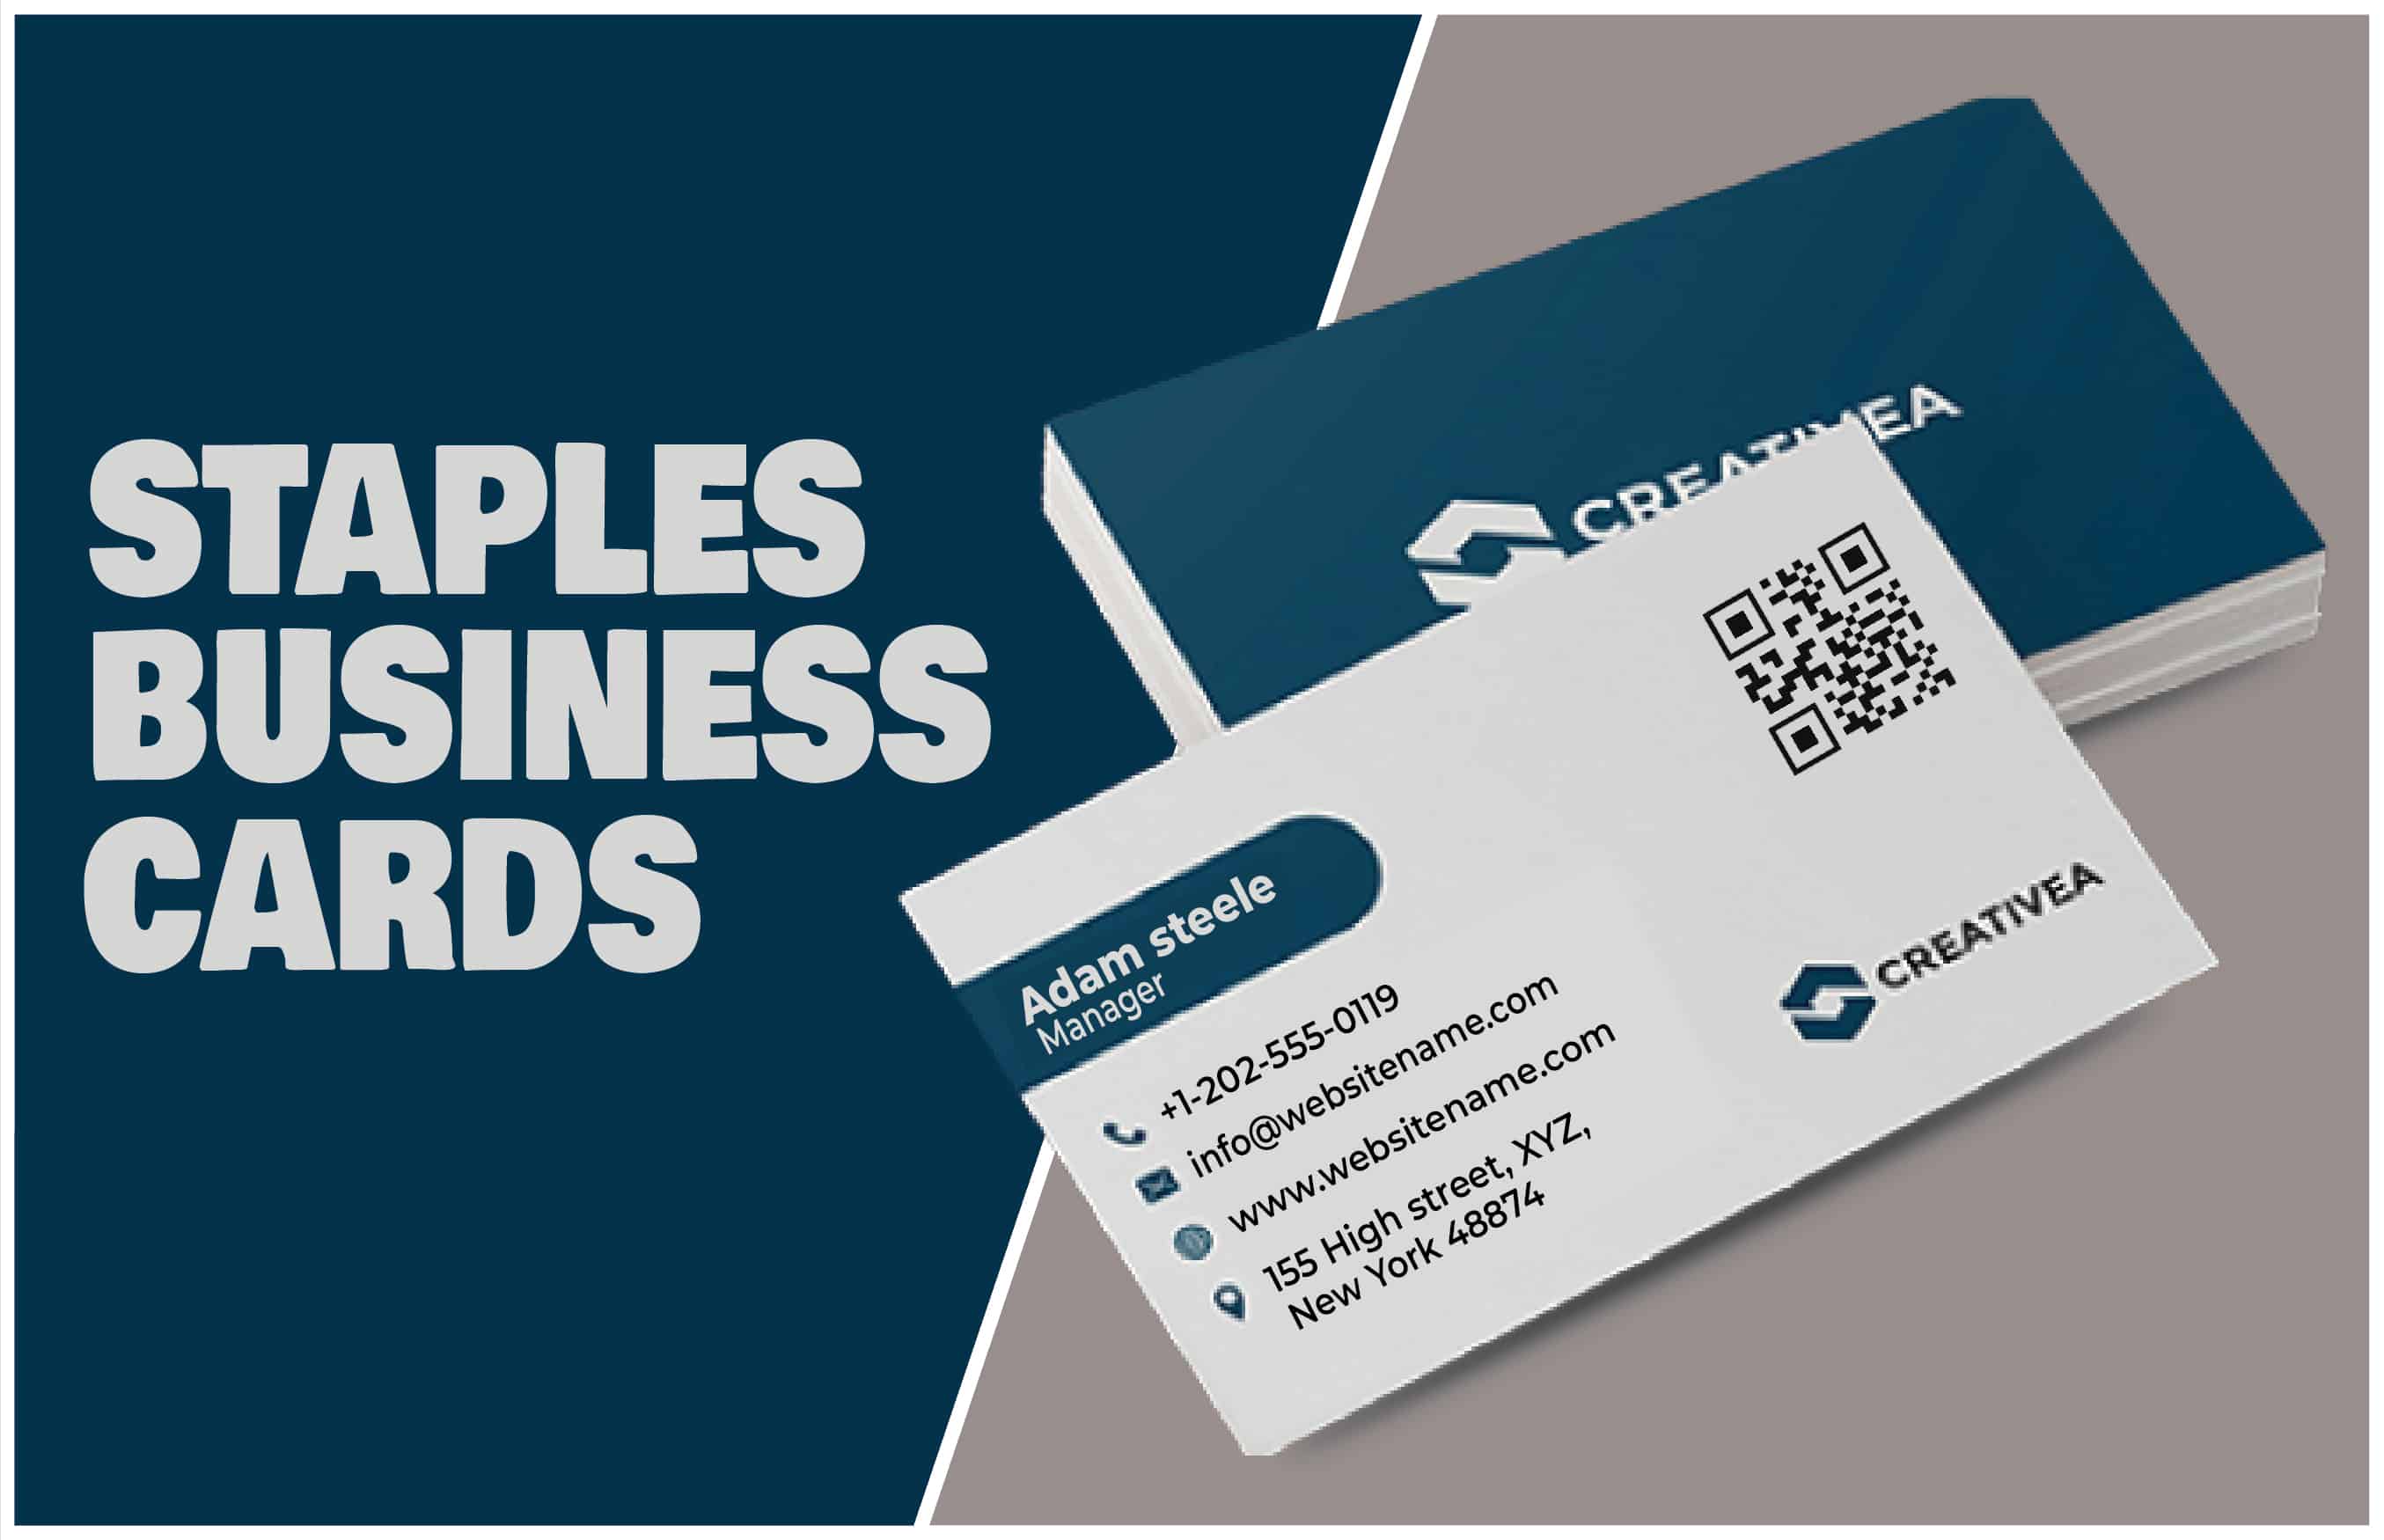  Stepping Towards A New Business Line? Or, Looking For Fresh Business Cards? Here’s How...